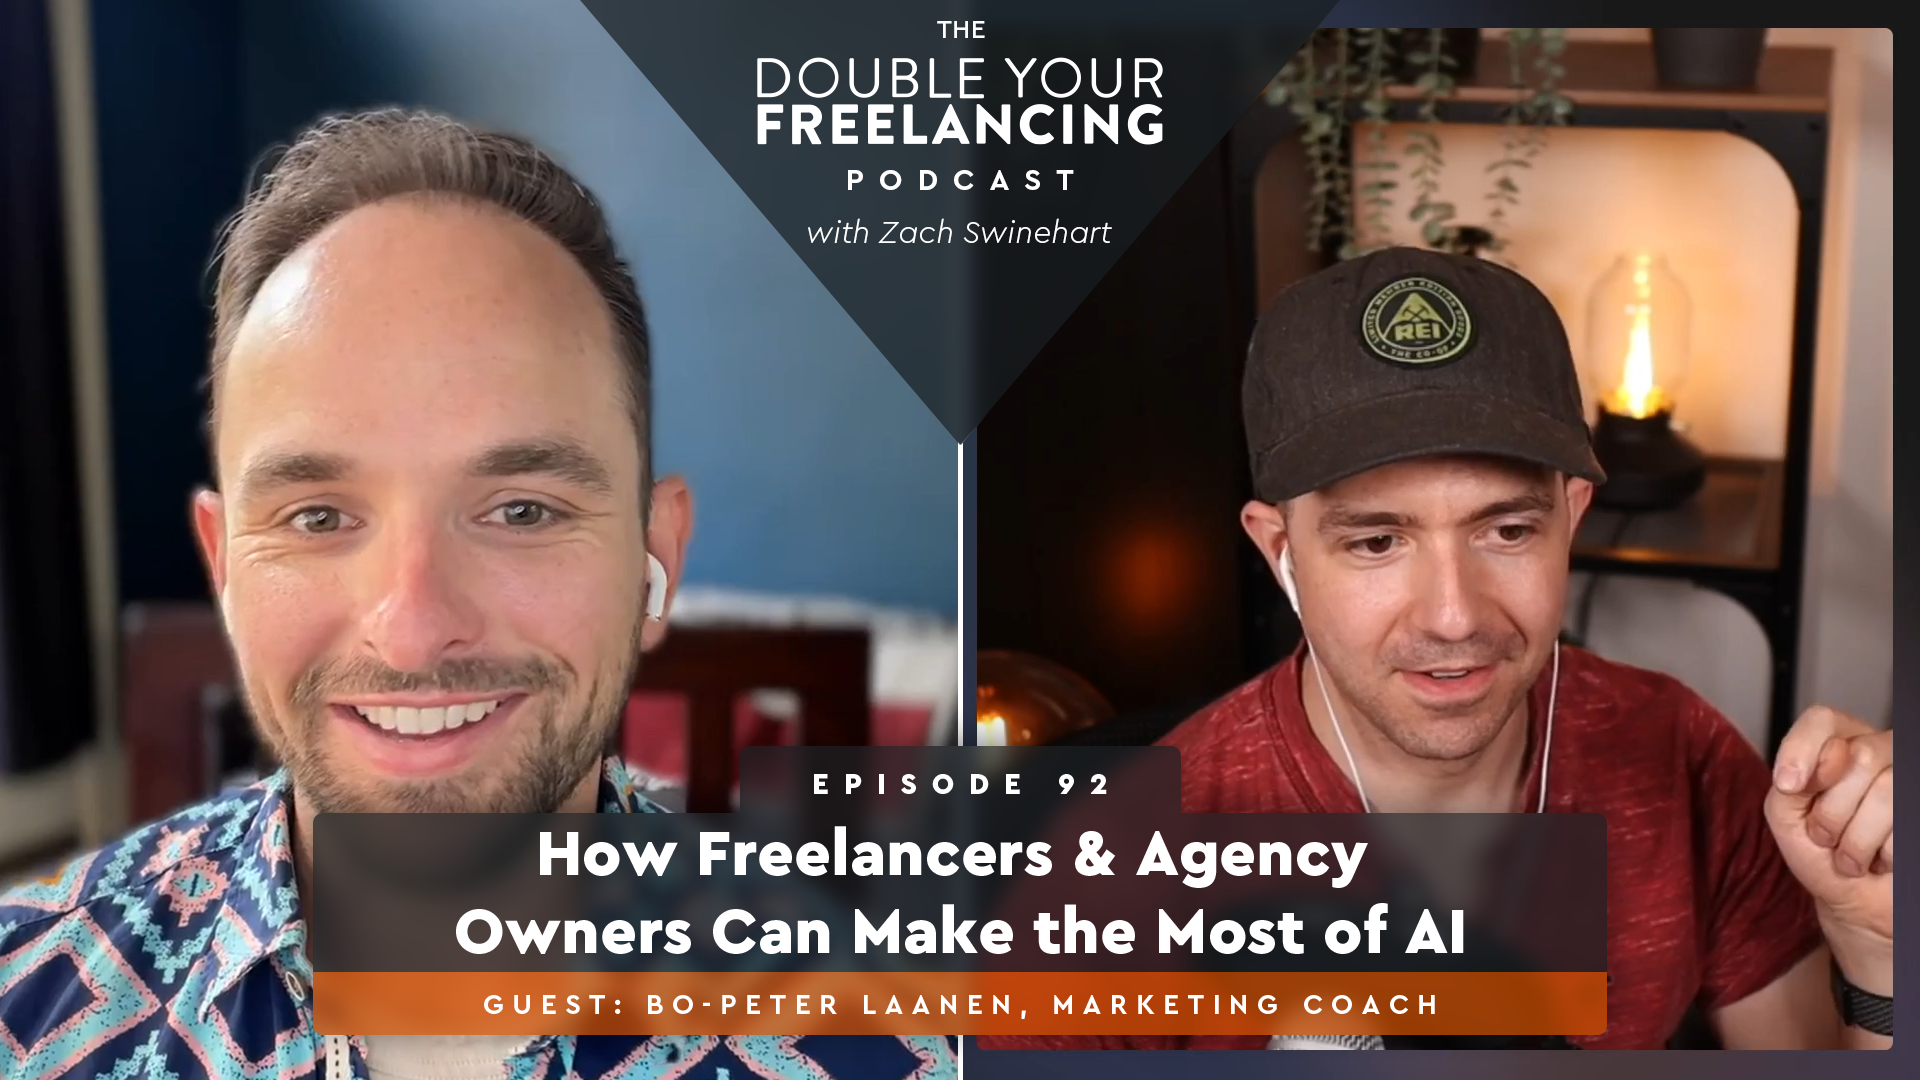 Episode 92: How Freelancers & Agency Owners Can Make the Most of AI, with Bo-Peter Laanen